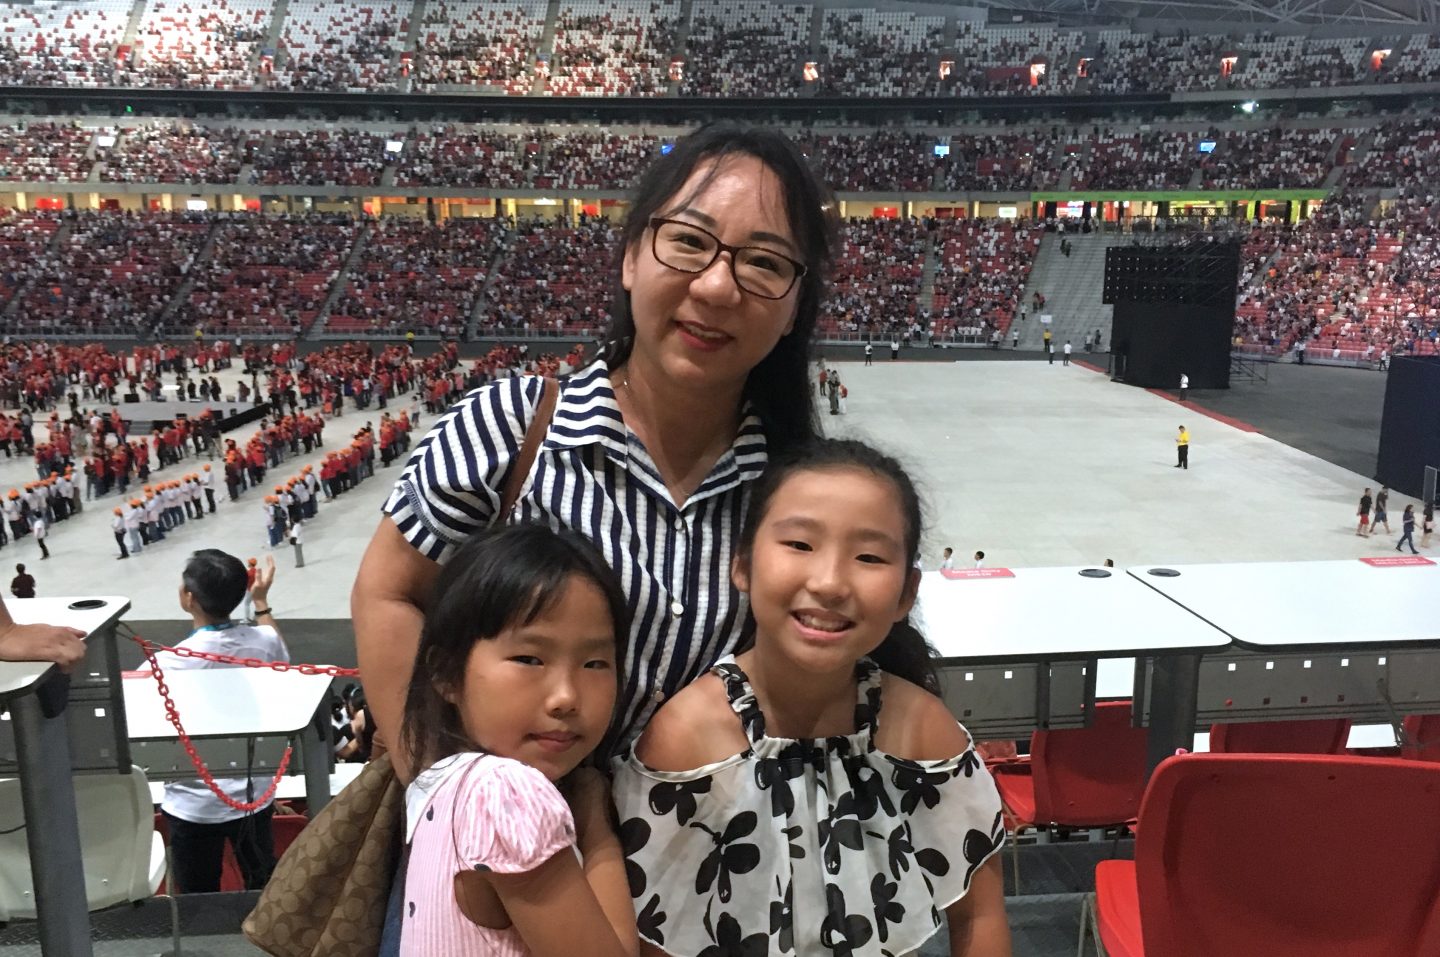 "I don’t believe yet — still have many considerations, but when I came tonight, I had some feeling of peace. It is very comforting. I have always been drawn (to church), and it doesn’t speak to me personally yet, but to my mind.” Shirley Park, 37, and her two daughters, Rong Rong and Yue Yue, aged 8 and 6.